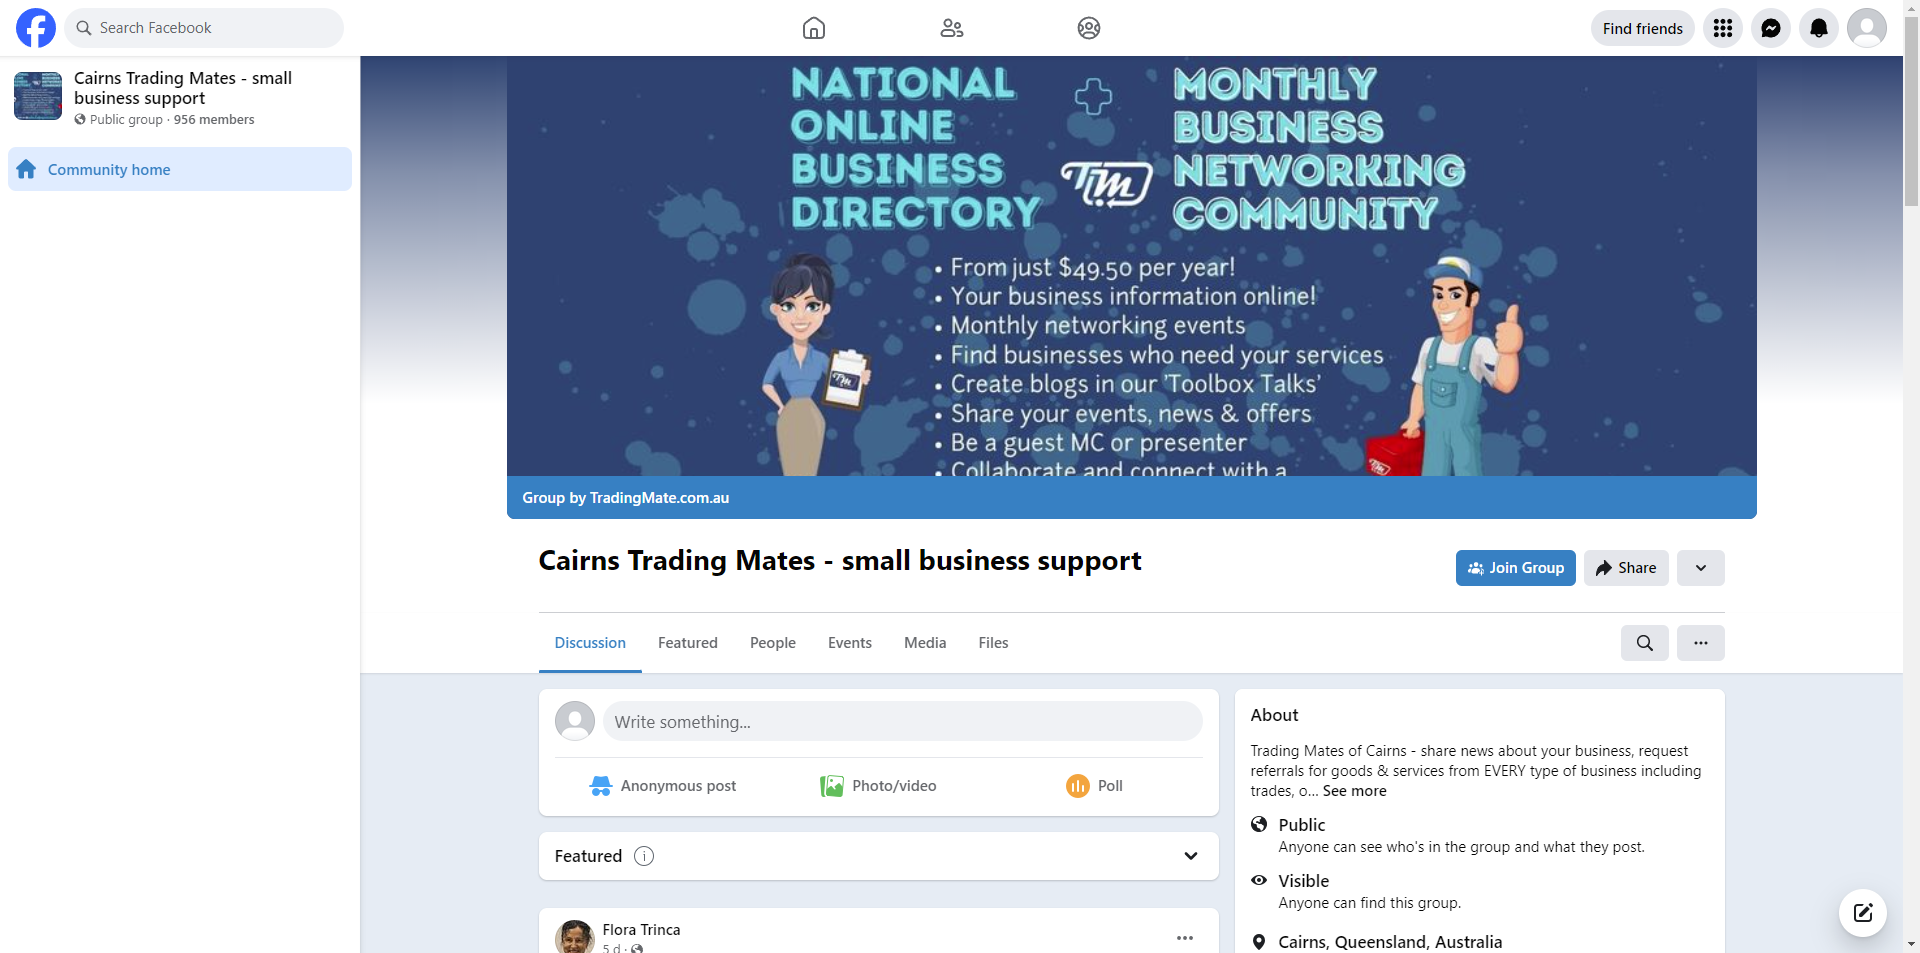 Cairns Trading Mates - Small Business Support